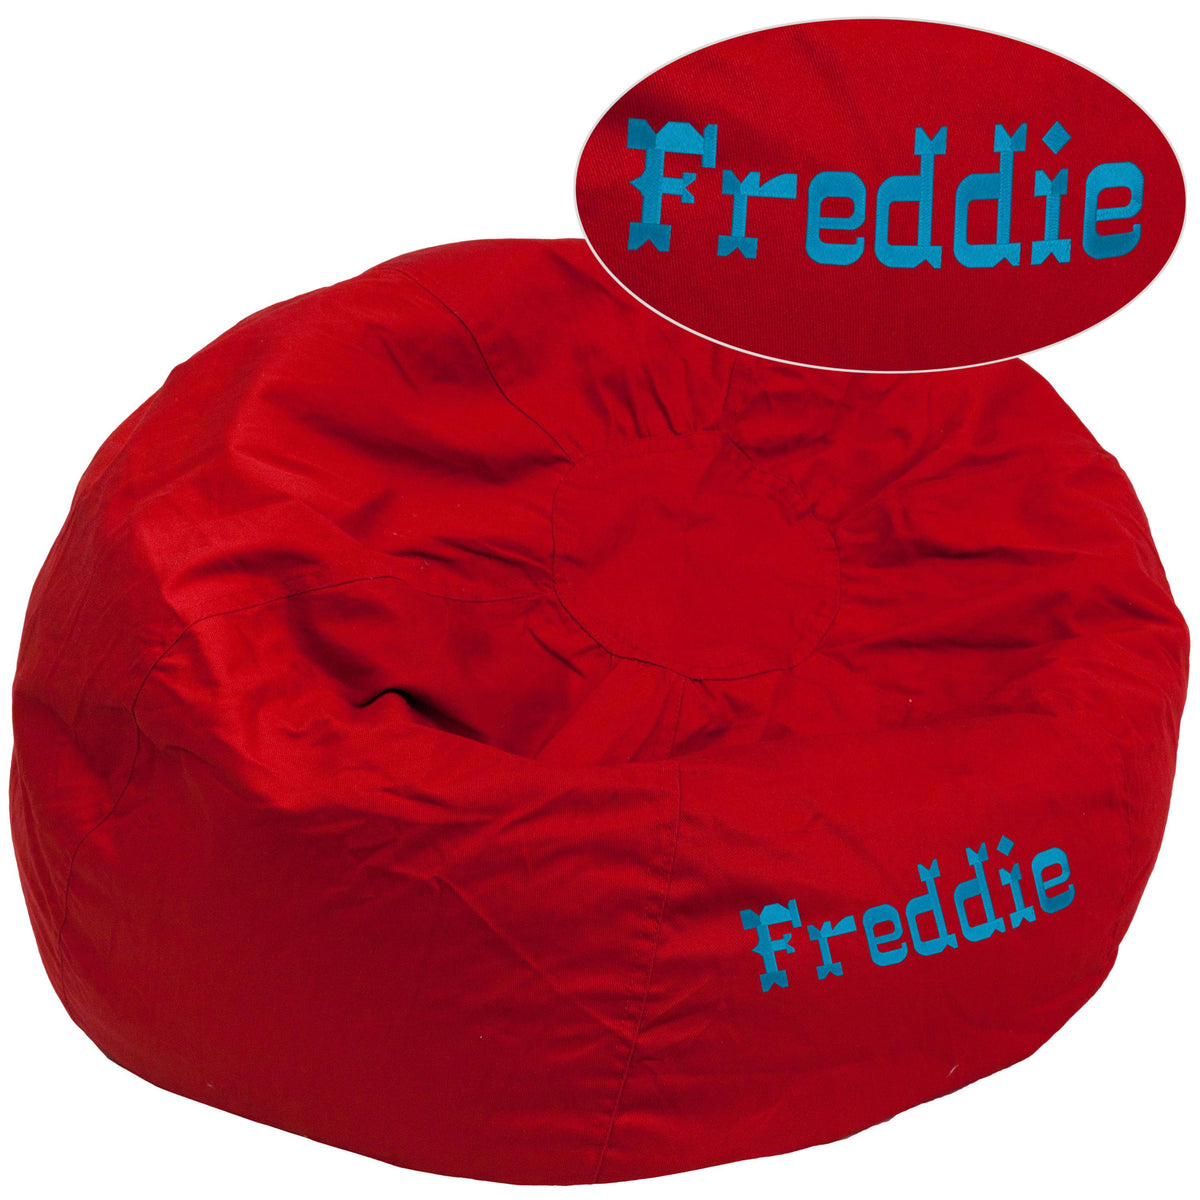 Red |#| Personalized Oversized Solid Red Refillable Bean Bag Chair for Kids and Adults